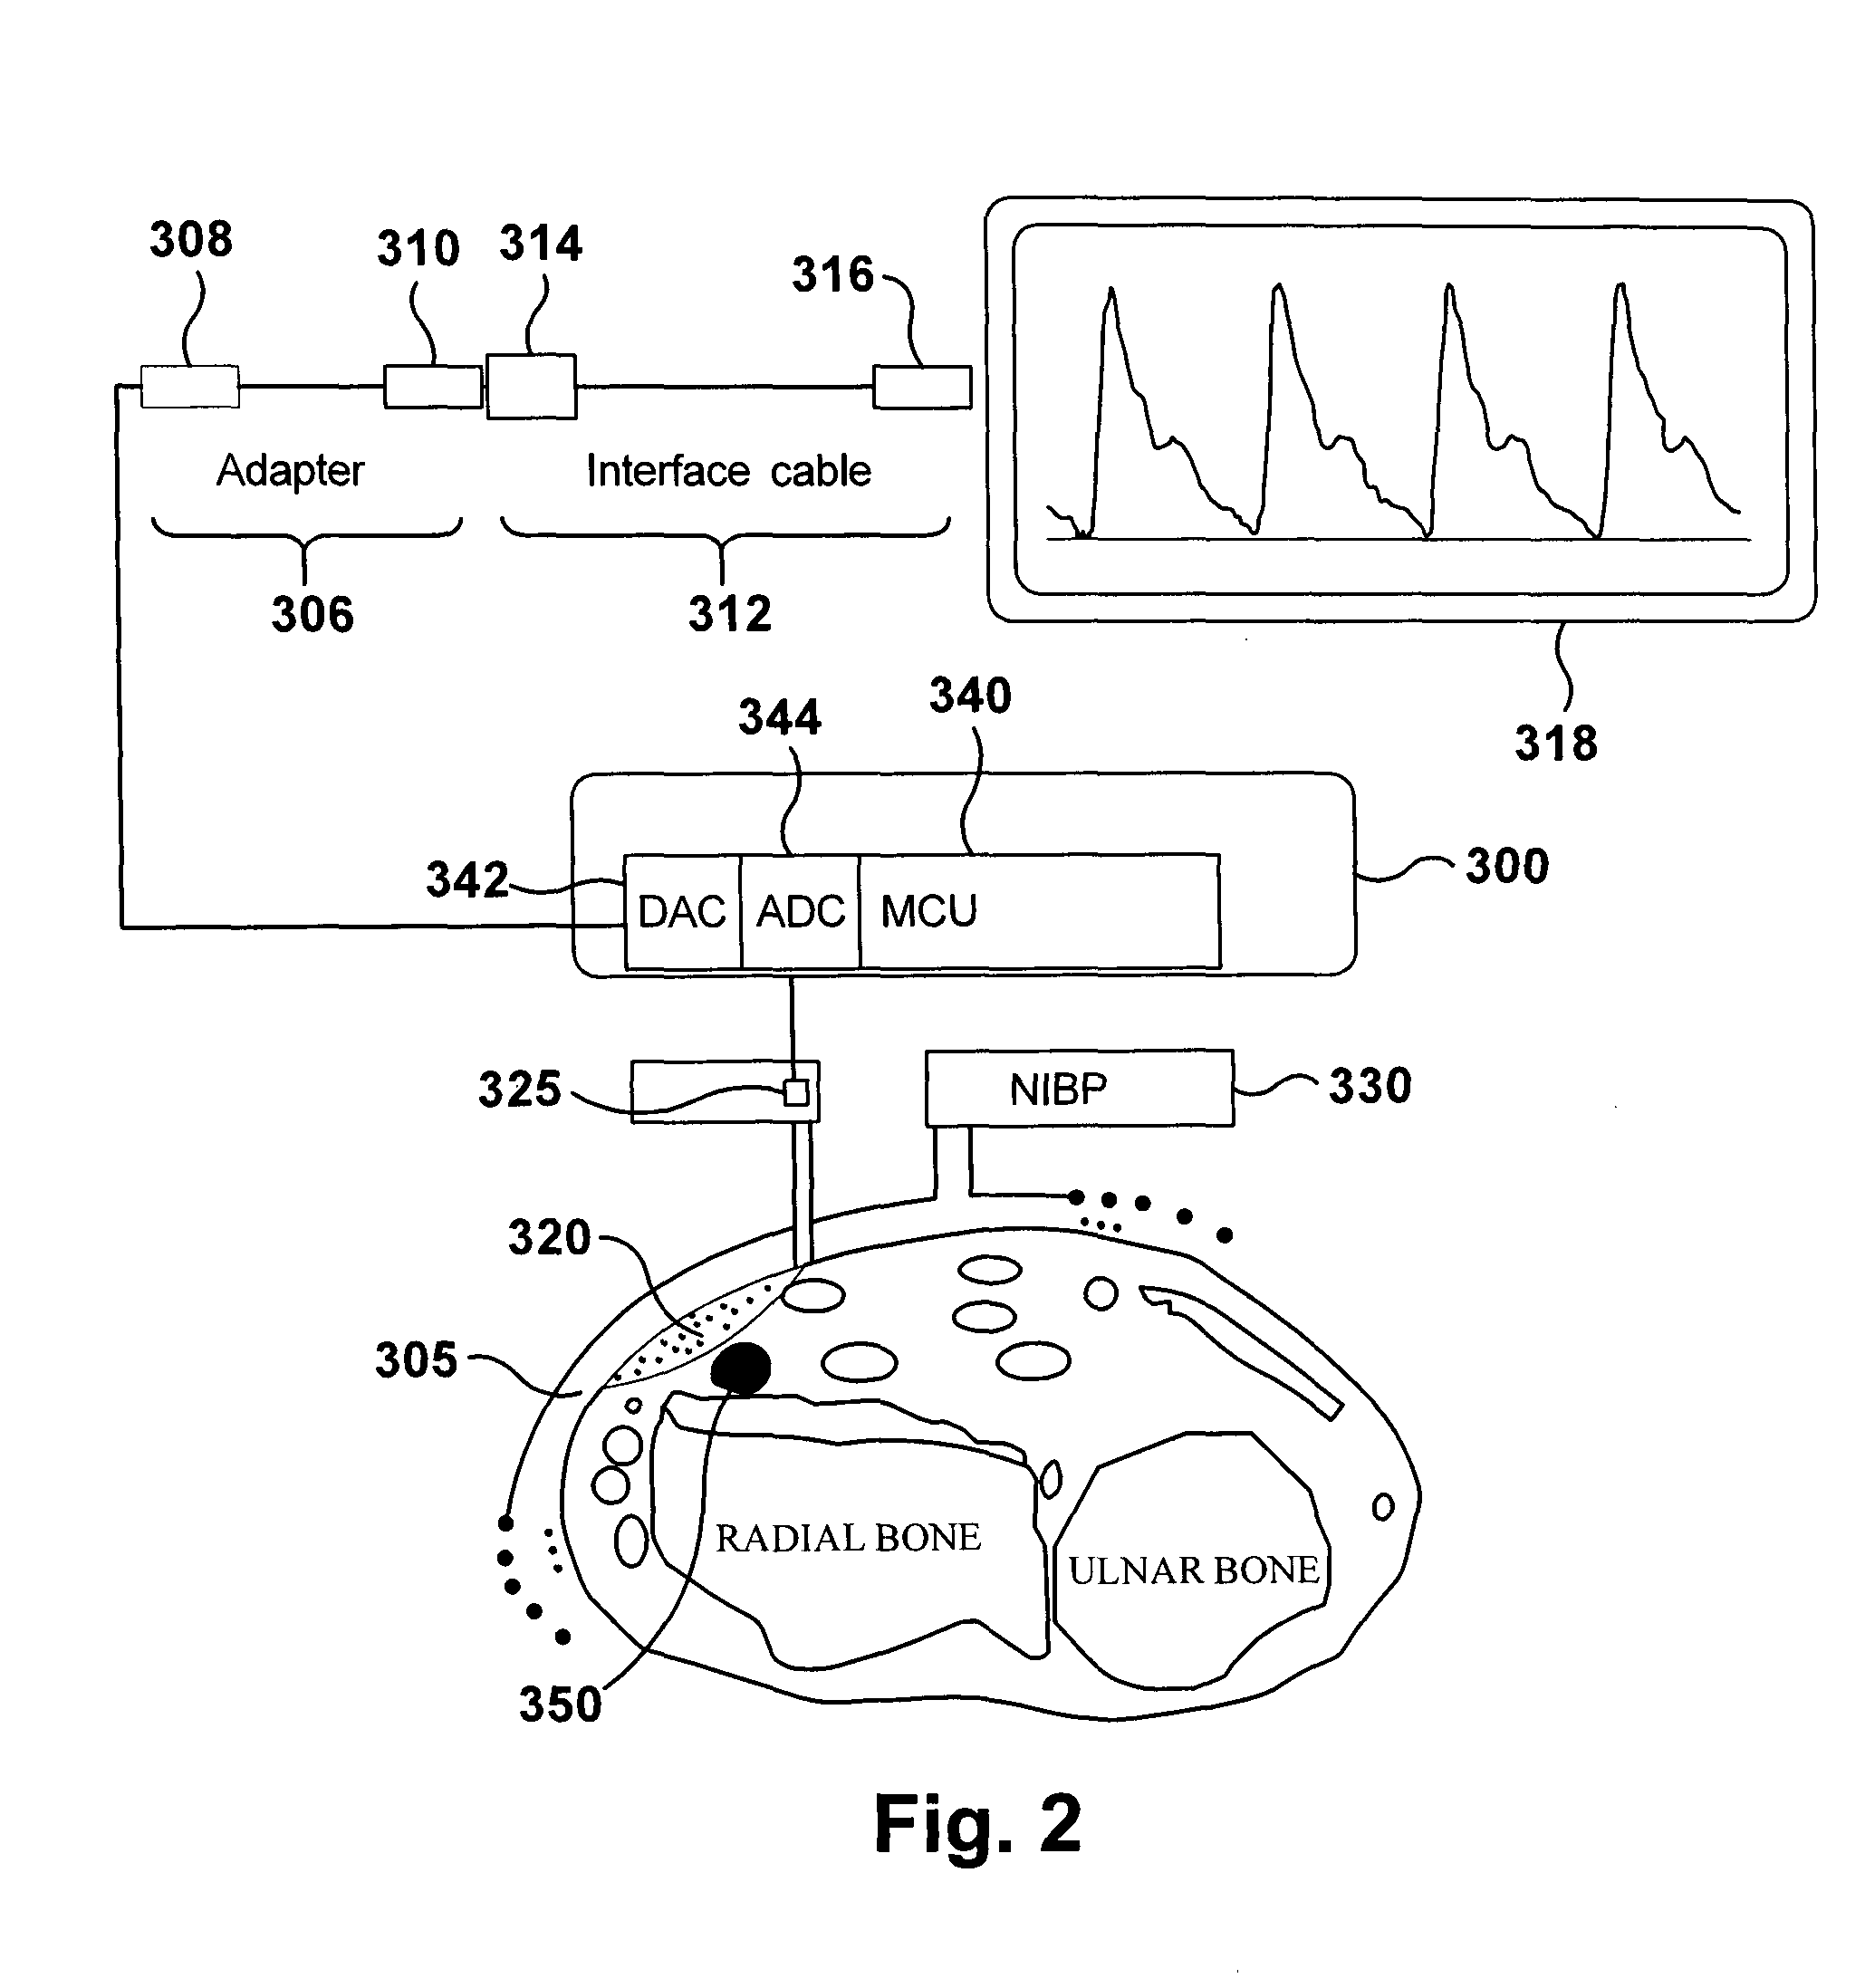 Apparatus and method for continuous oscillometric blood pressure measurement